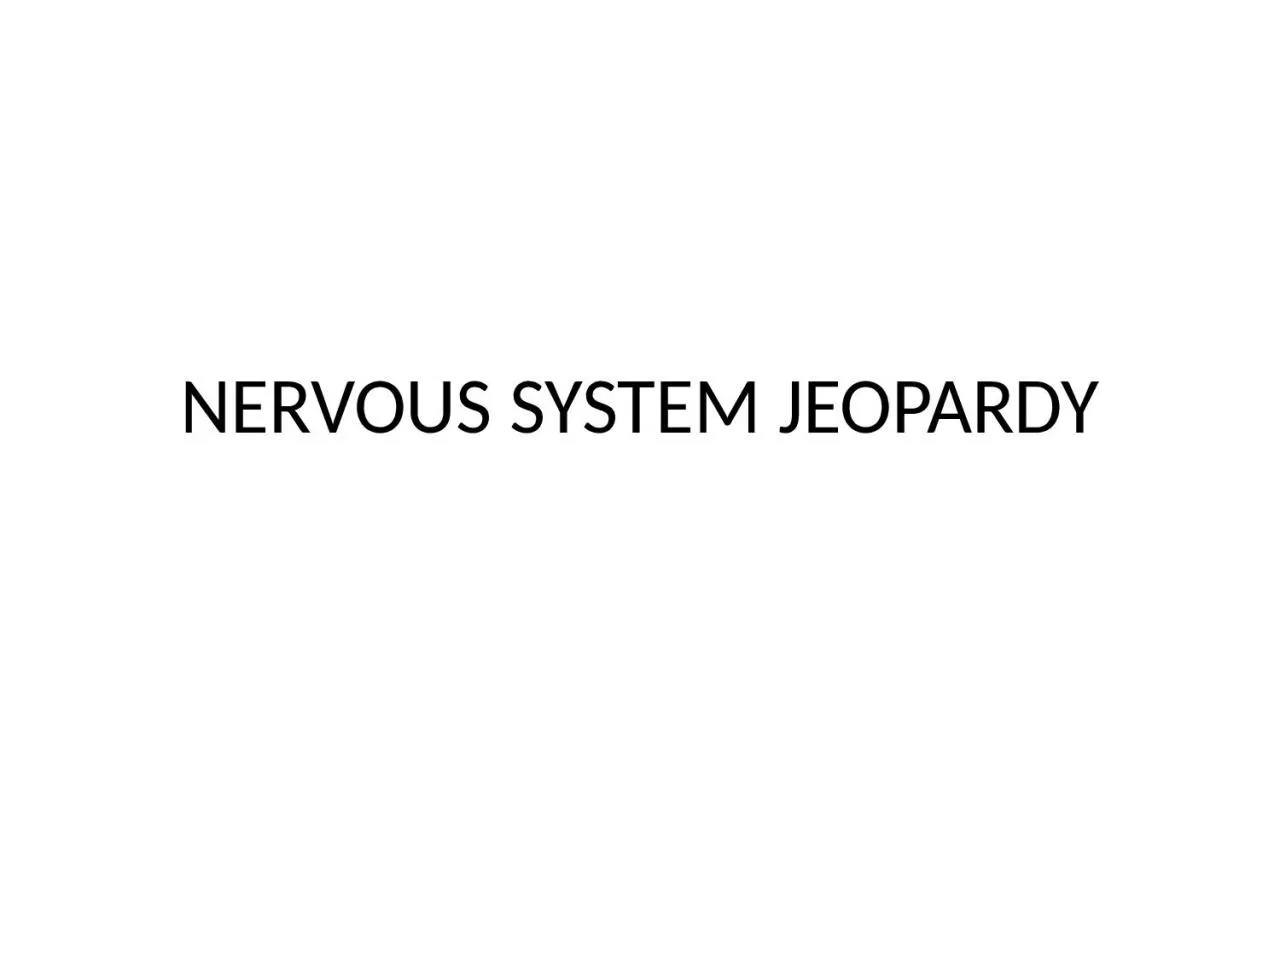 NERVOUS SYSTEM JEOPARDY FUN FACTS